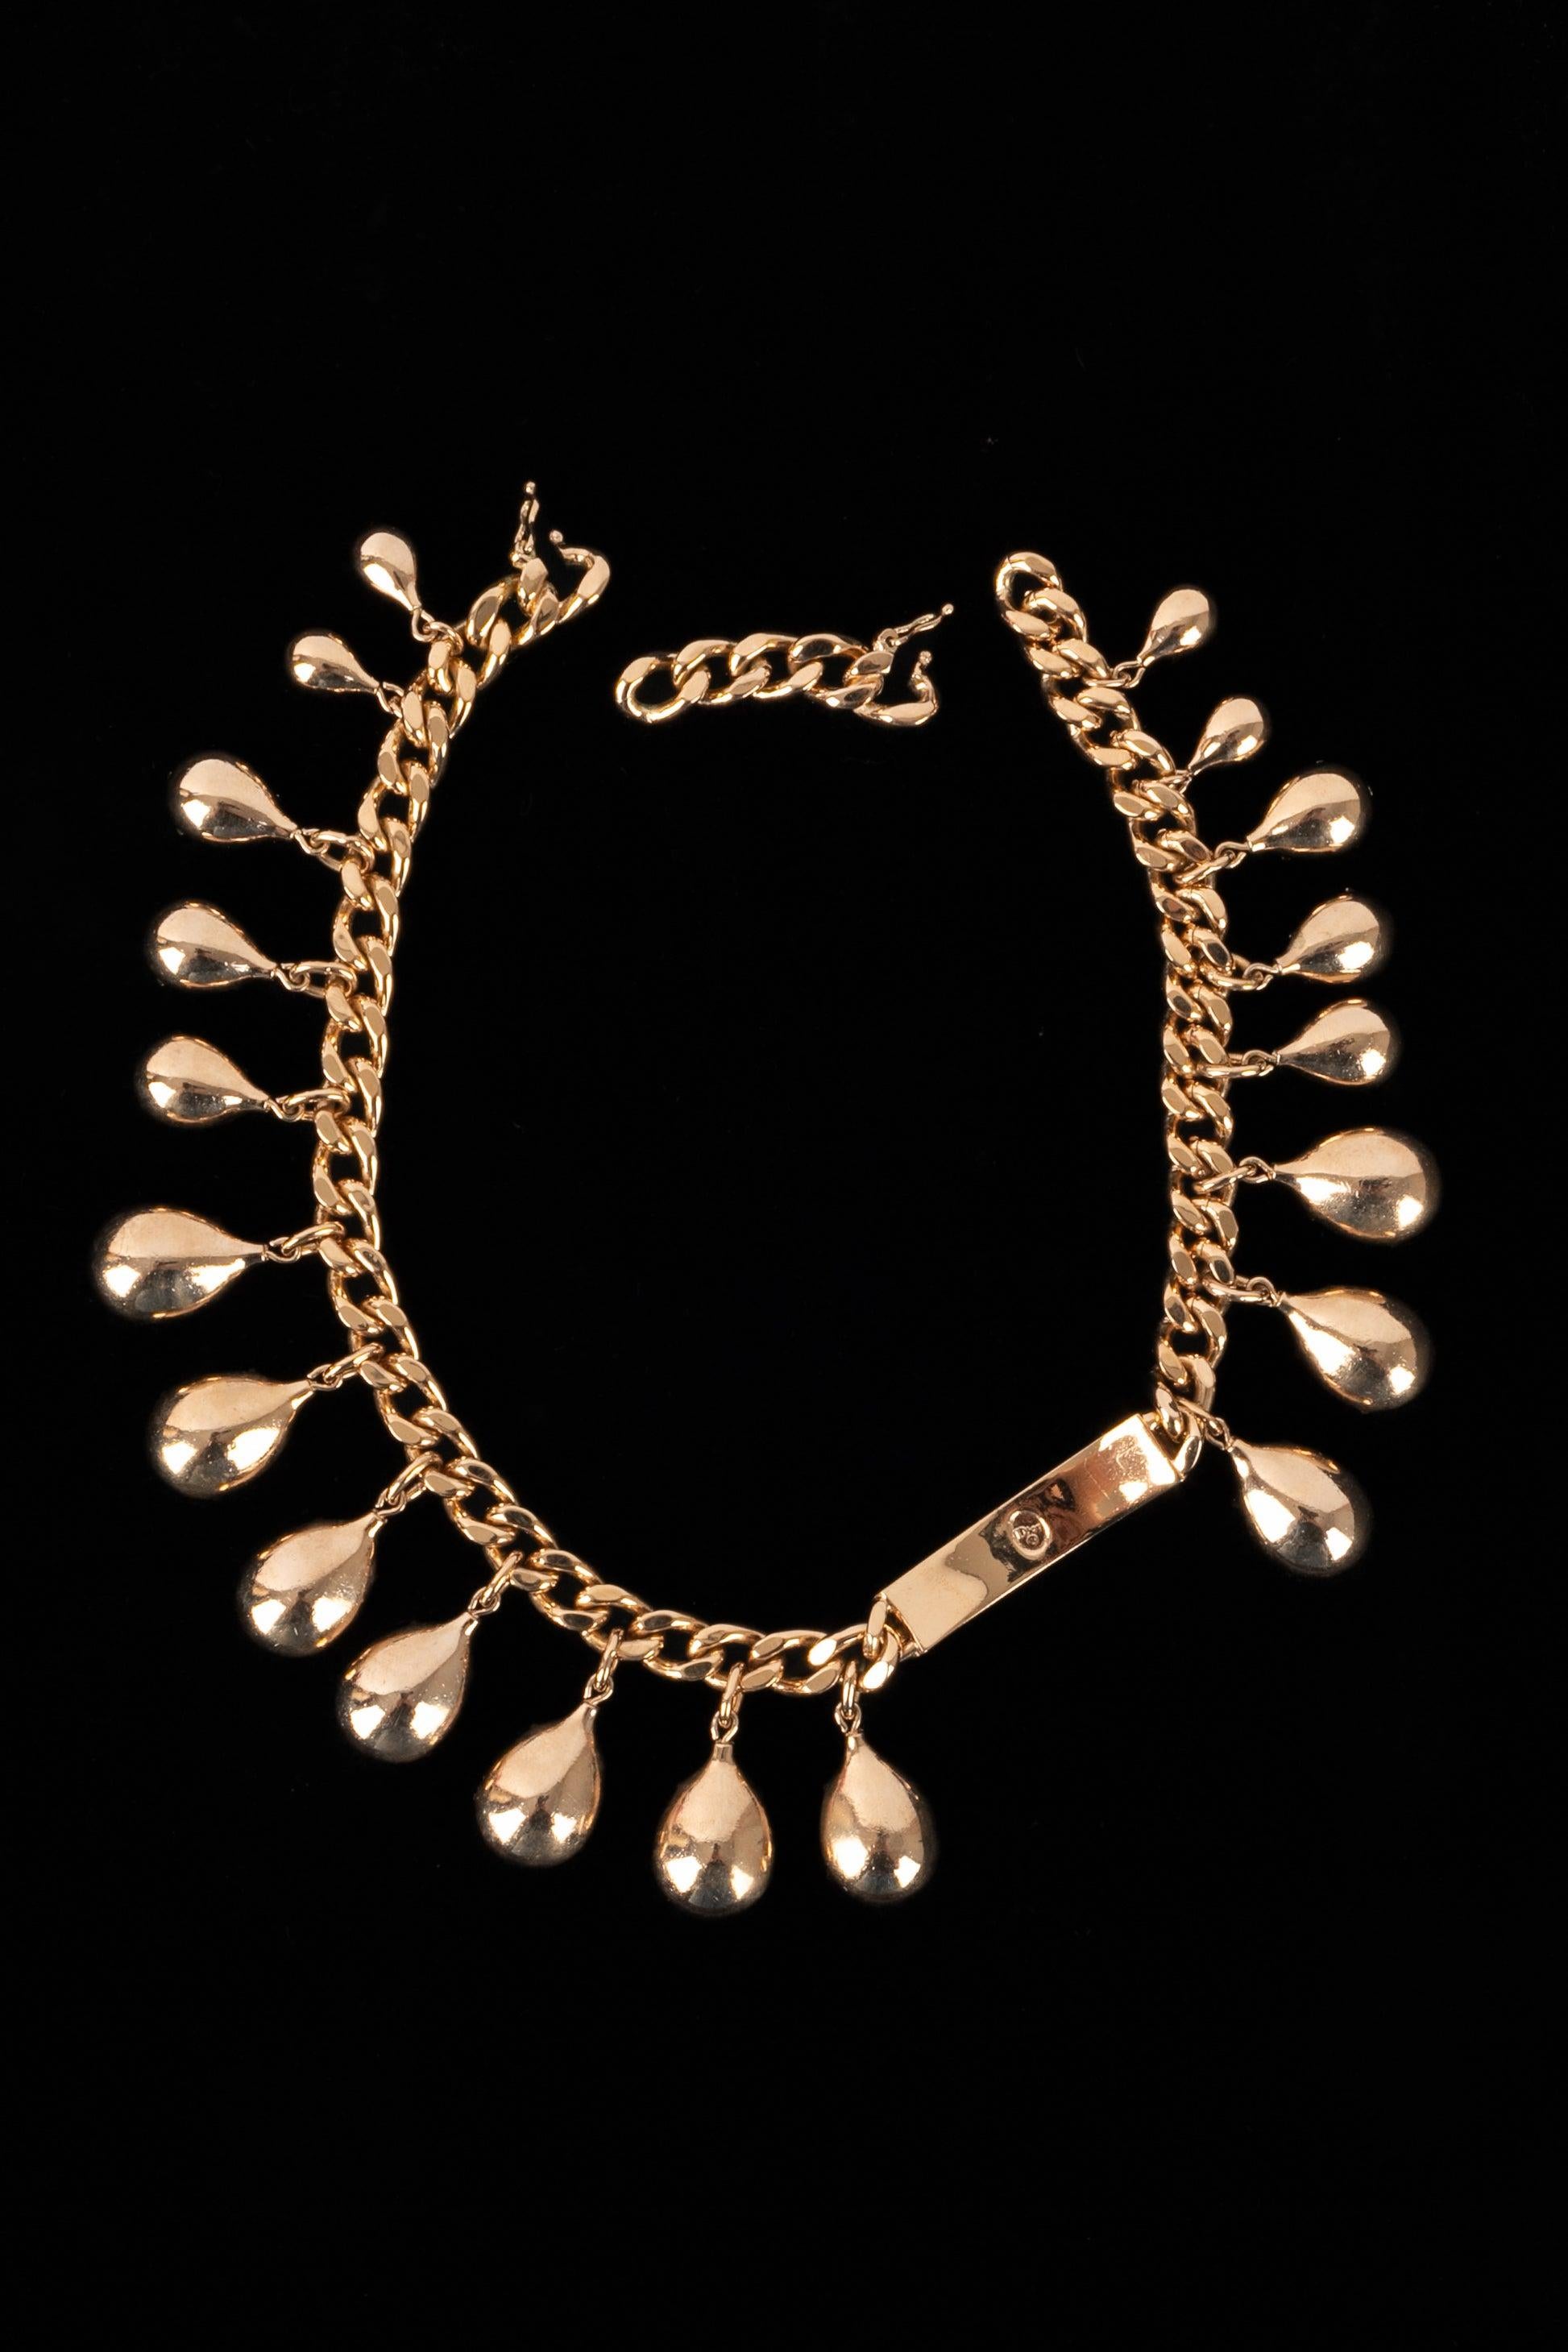 Dior - Golden metal chain necklace ornamented with rhinestoned charms. 2004 Fall-Winter Ready-to-Wear Collection.

Additional information: 
Condition: Very good condition
Dimensions: Length: 39 cm
Period: 21st Century
 
Seller Reference: BC215